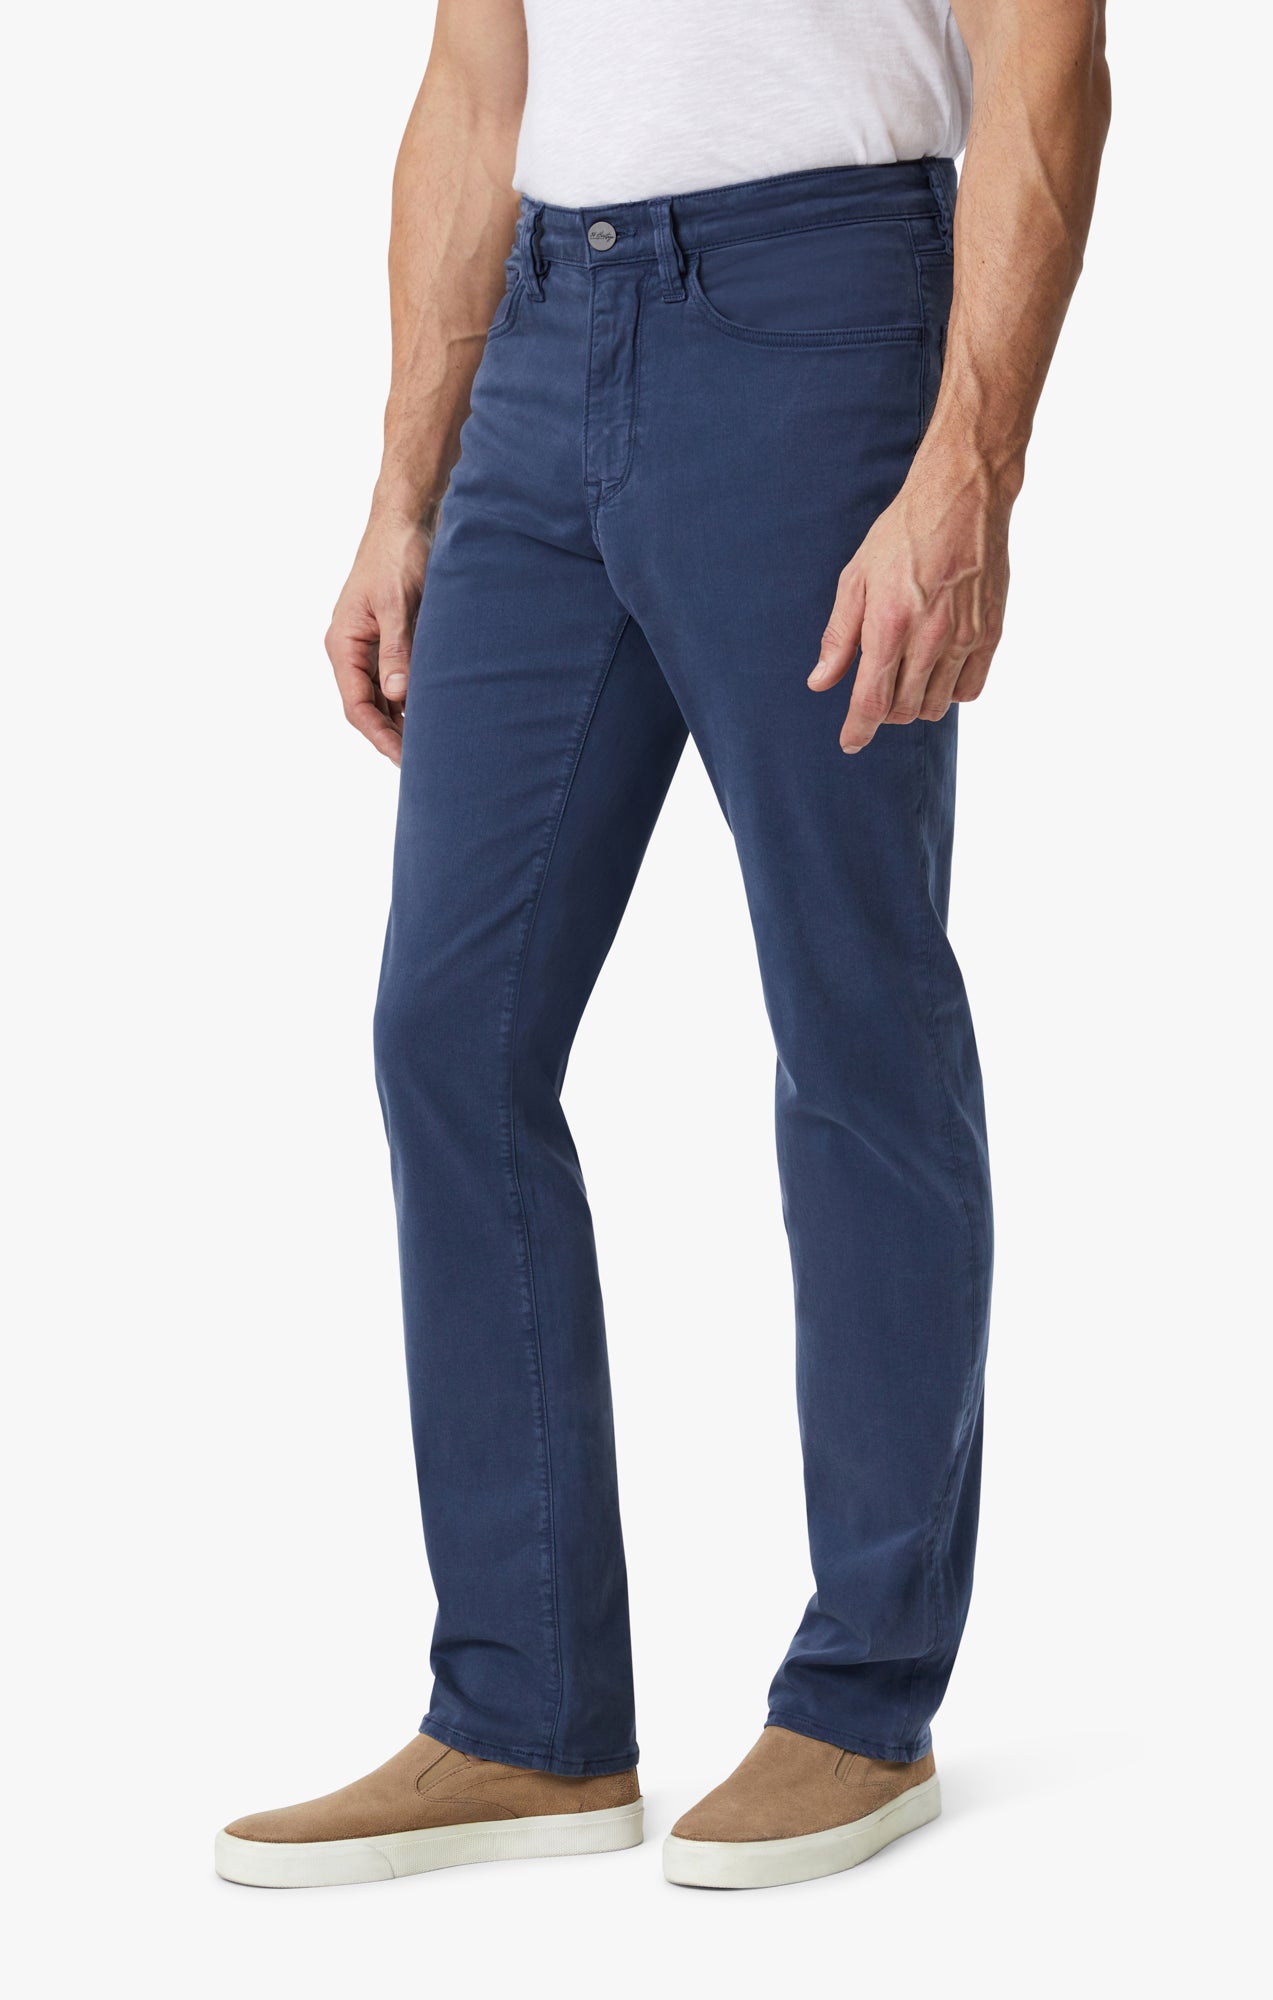 JohnBlairFlex Relaxed-Fit Back-Elastic Twill and Denim Pants | Blair